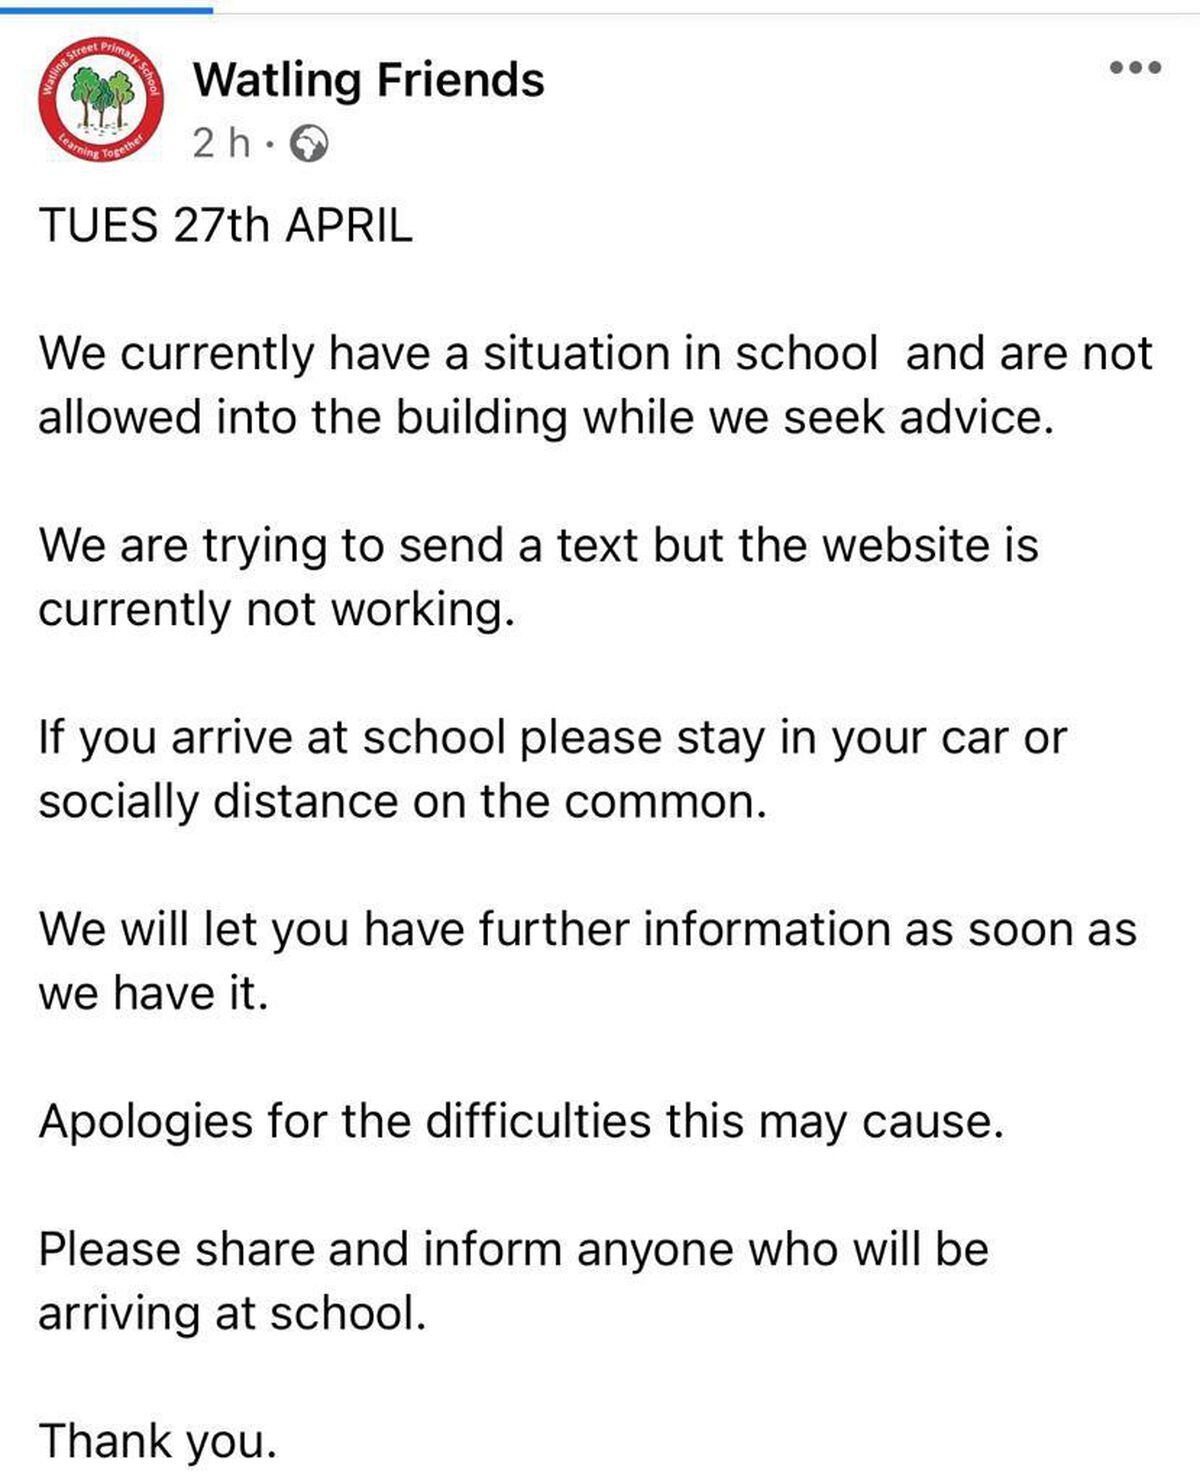 Facebook message posted by the school